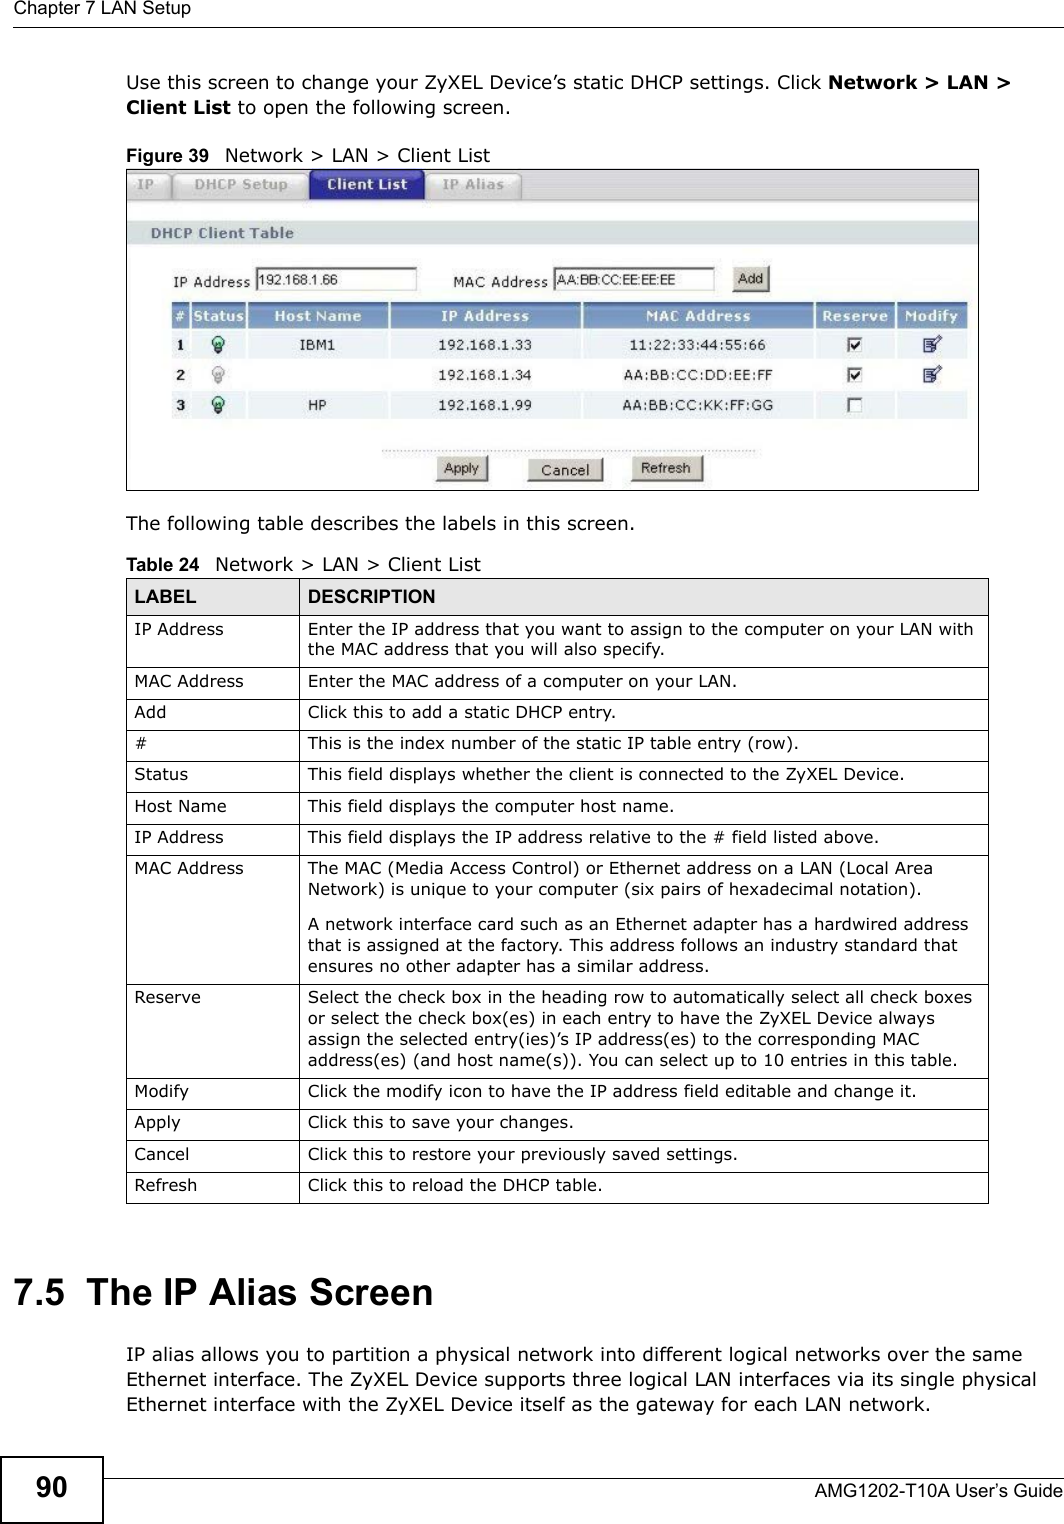 Chapter 7 LAN SetupAMG1202-T10A User’s Guide90Use this screen to change your ZyXEL Device’s static DHCP settings. Click Network &gt; LAN &gt; Client List to open the following screen.Figure 39   Network &gt; LAN &gt; Client List The following table describes the labels in this screen.7.5  The IP Alias ScreenIP alias allows you to partition a physical network into different logical networks over the same Ethernet interface. The ZyXEL Device supports three logical LAN interfaces via its single physical Ethernet interface with the ZyXEL Device itself as the gateway for each LAN network.Table 24   Network &gt; LAN &gt; Client ListLABEL DESCRIPTIONIP Address Enter the IP address that you want to assign to the computer on your LAN with the MAC address that you will also specify.MAC Address Enter the MAC address of a computer on your LAN.Add Click this to add a static DHCP entry. # This is the index number of the static IP table entry (row).Status This field displays whether the client is connected to the ZyXEL Device.Host Name  This field displays the computer host name.IP Address This field displays the IP address relative to the # field listed above.MAC Address The MAC (Media Access Control) or Ethernet address on a LAN (Local Area Network) is unique to your computer (six pairs of hexadecimal notation).A network interface card such as an Ethernet adapter has a hardwired address that is assigned at the factory. This address follows an industry standard that ensures no other adapter has a similar address.Reserve Select the check box in the heading row to automatically select all check boxes or select the check box(es) in each entry to have the ZyXEL Device always assign the selected entry(ies)’s IP address(es) to the corresponding MAC address(es) (and host name(s)). You can select up to 10 entries in this table. Modify Click the modify icon to have the IP address field editable and change it.Apply Click this to save your changes.Cancel Click this to restore your previously saved settings.Refresh Click this to reload the DHCP table.